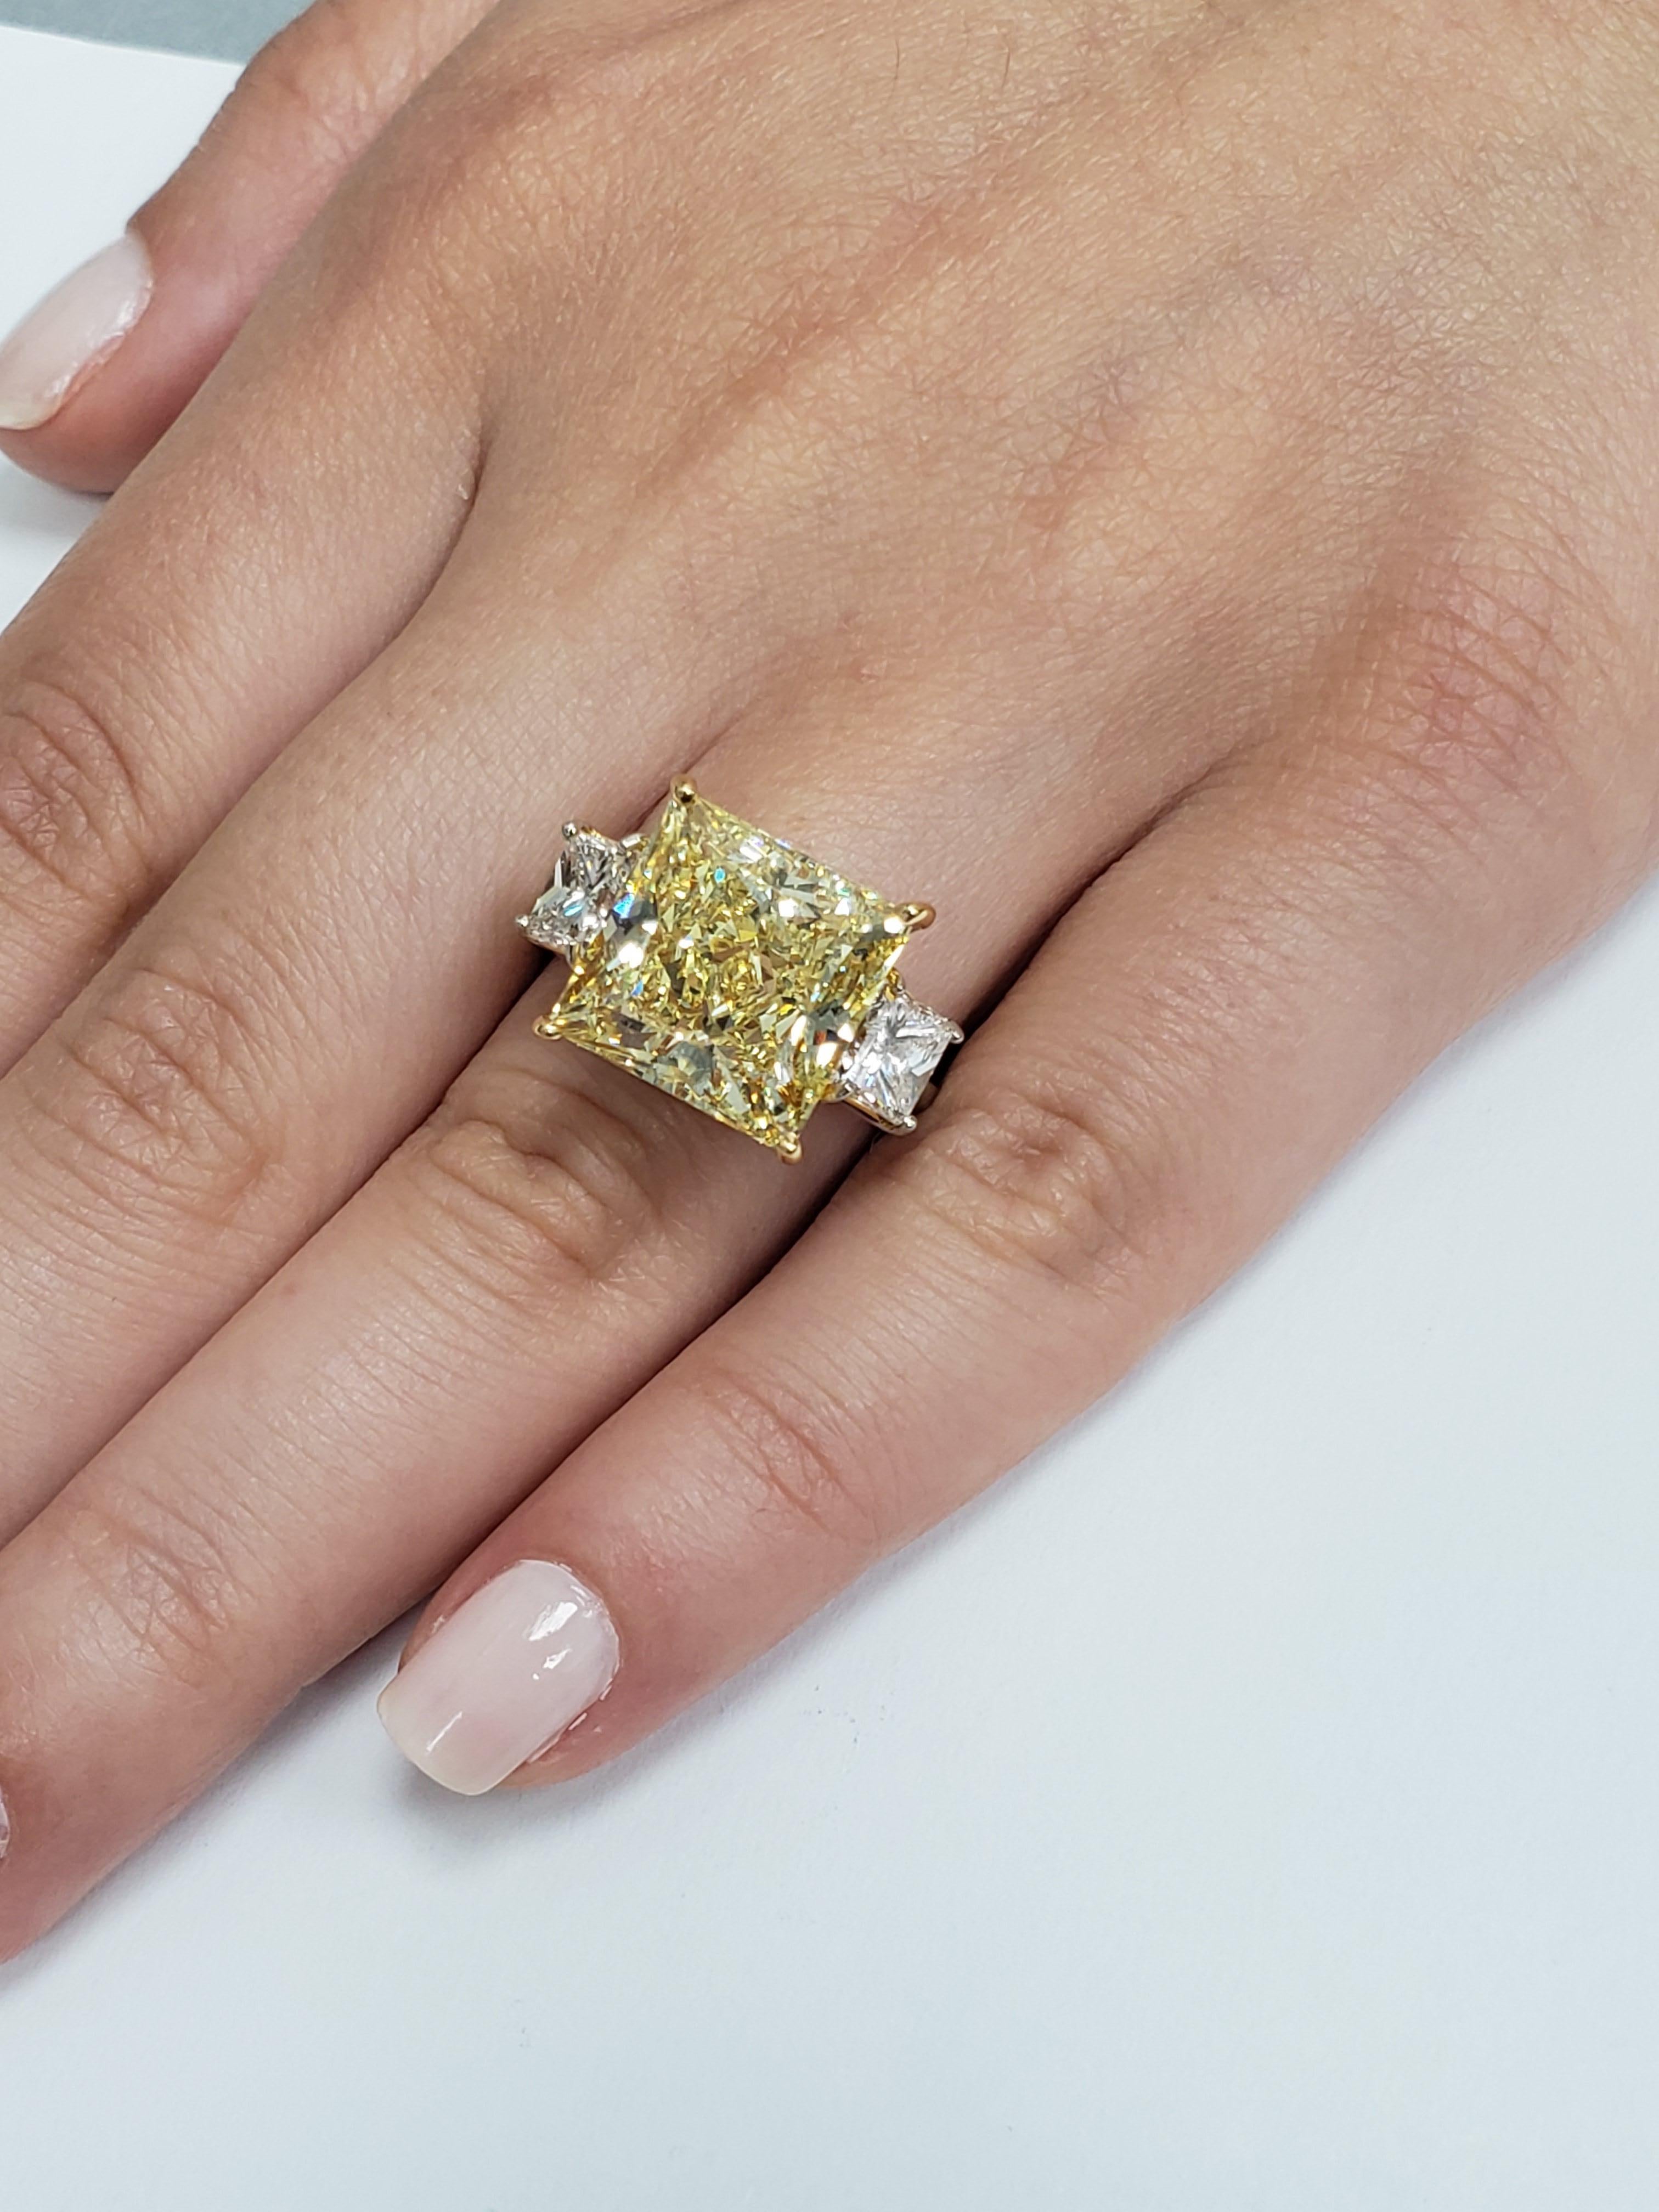 We bring you another Louis Newman & Company creation. If you want something big, shiny and yellow for a great price point, this is it. GIA Certified 11.11 carat princess cut diamond with a VS1 clarity and Natural Fancy Yellow. Mounted in a Platinum